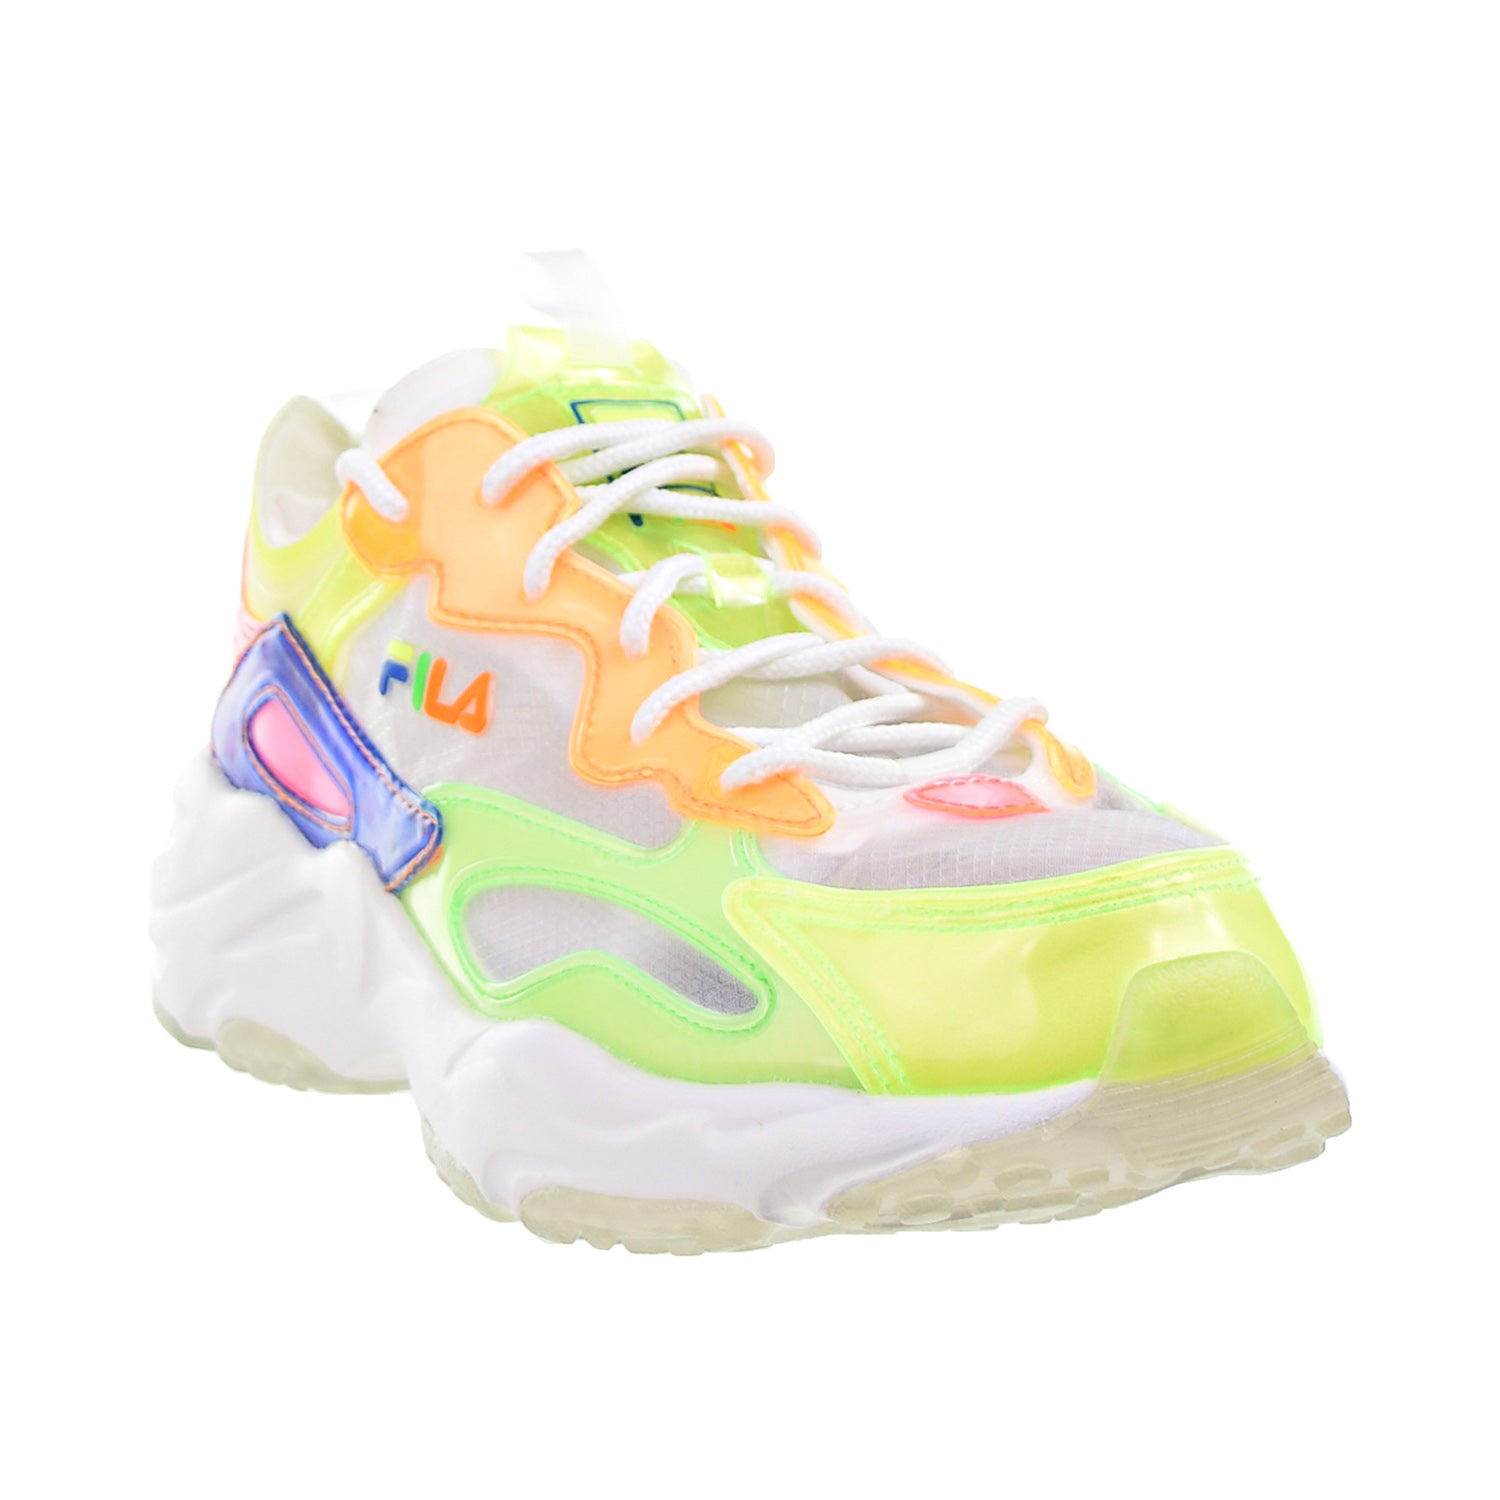 Fila Ray Tracer TL Women's Shoes White-Knockout Pink-Prince Blue